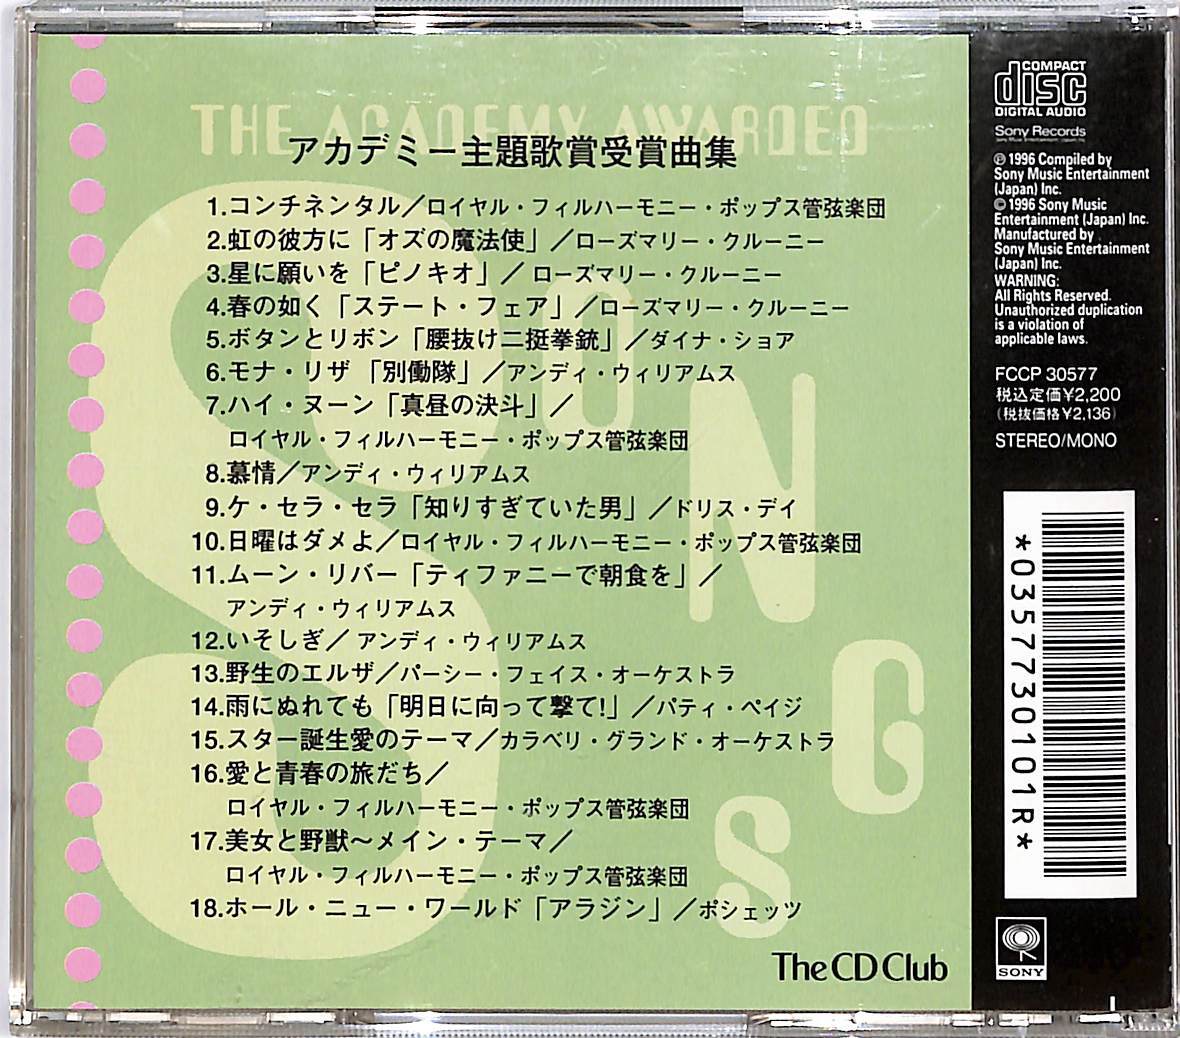 CD■Various Artists オムニバス■アカデミー主題歌賞受賞曲集　THE ACADEMY AWARDED SONGS■FCCP 30577_画像2